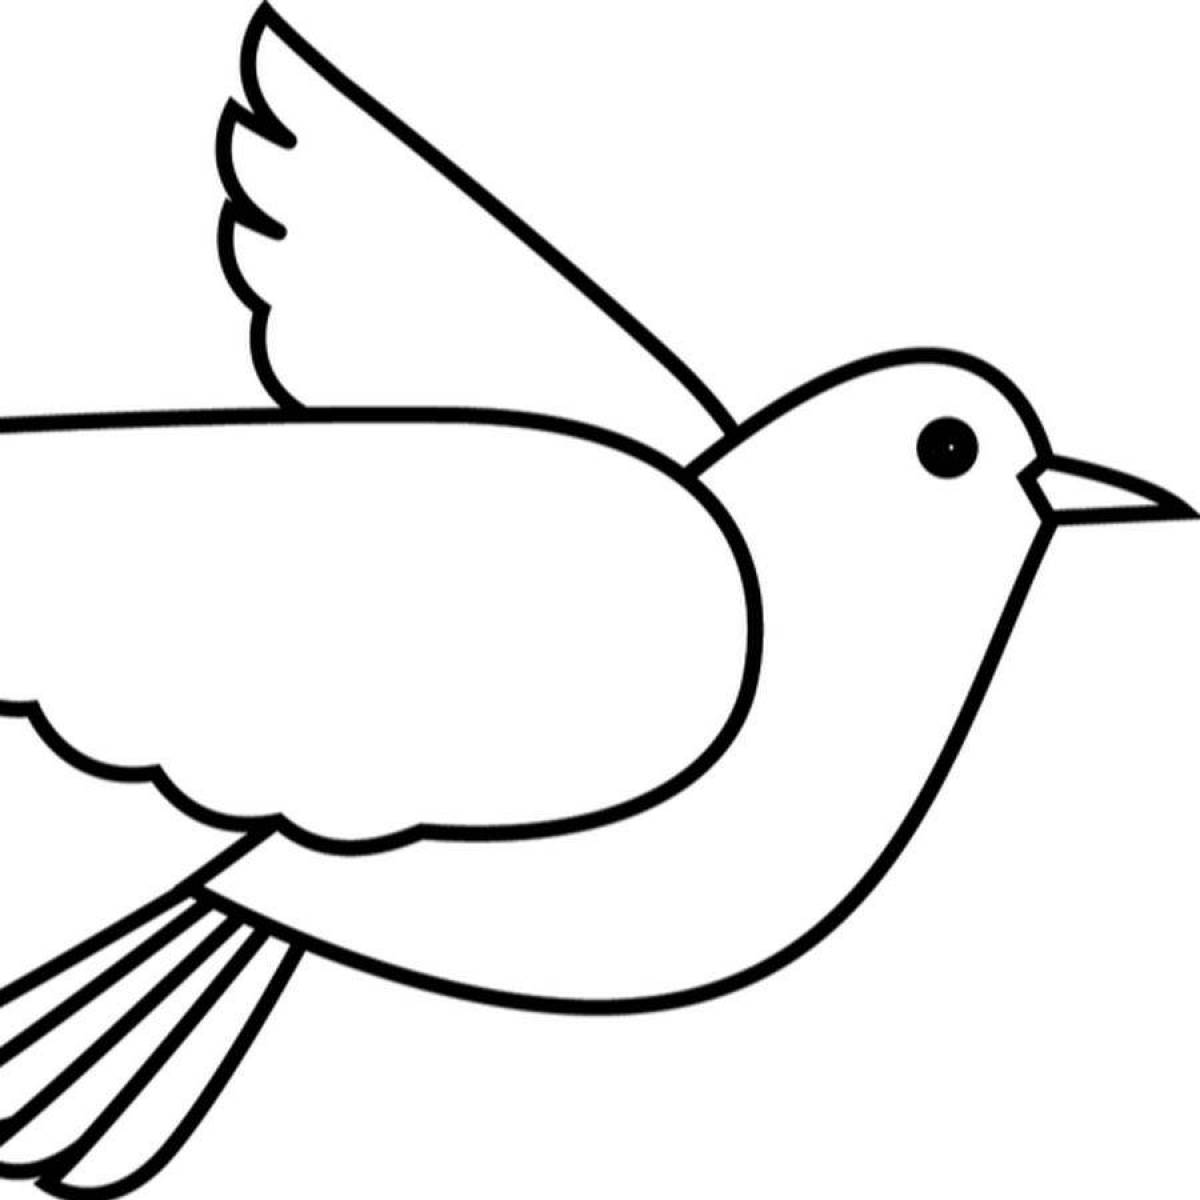 Coloring pages with cute birds for 2-3 year olds